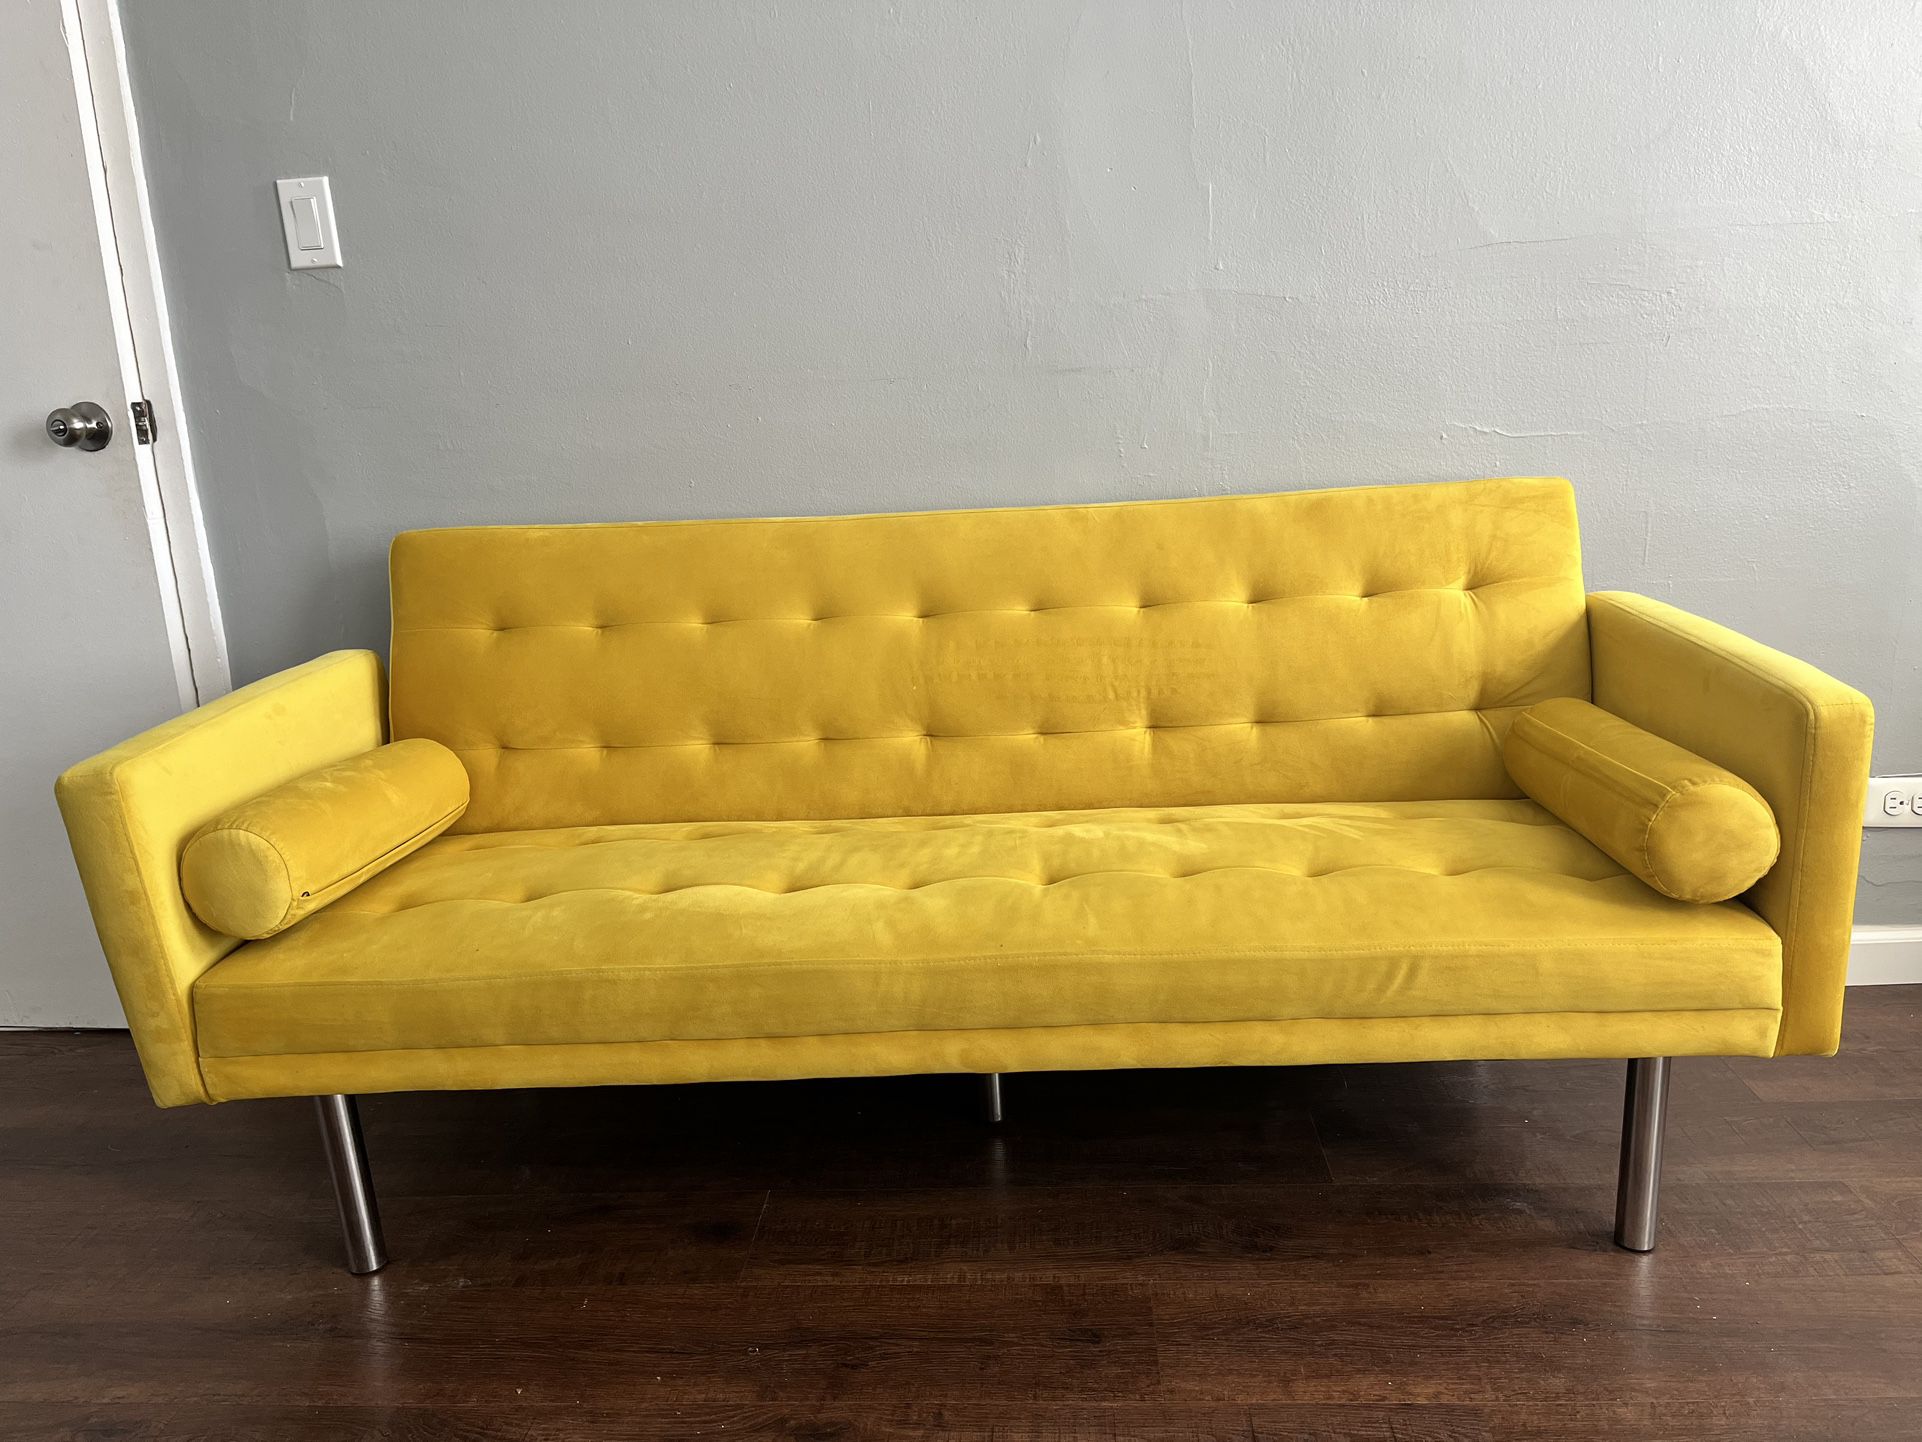 Yellow Fold Out Couch